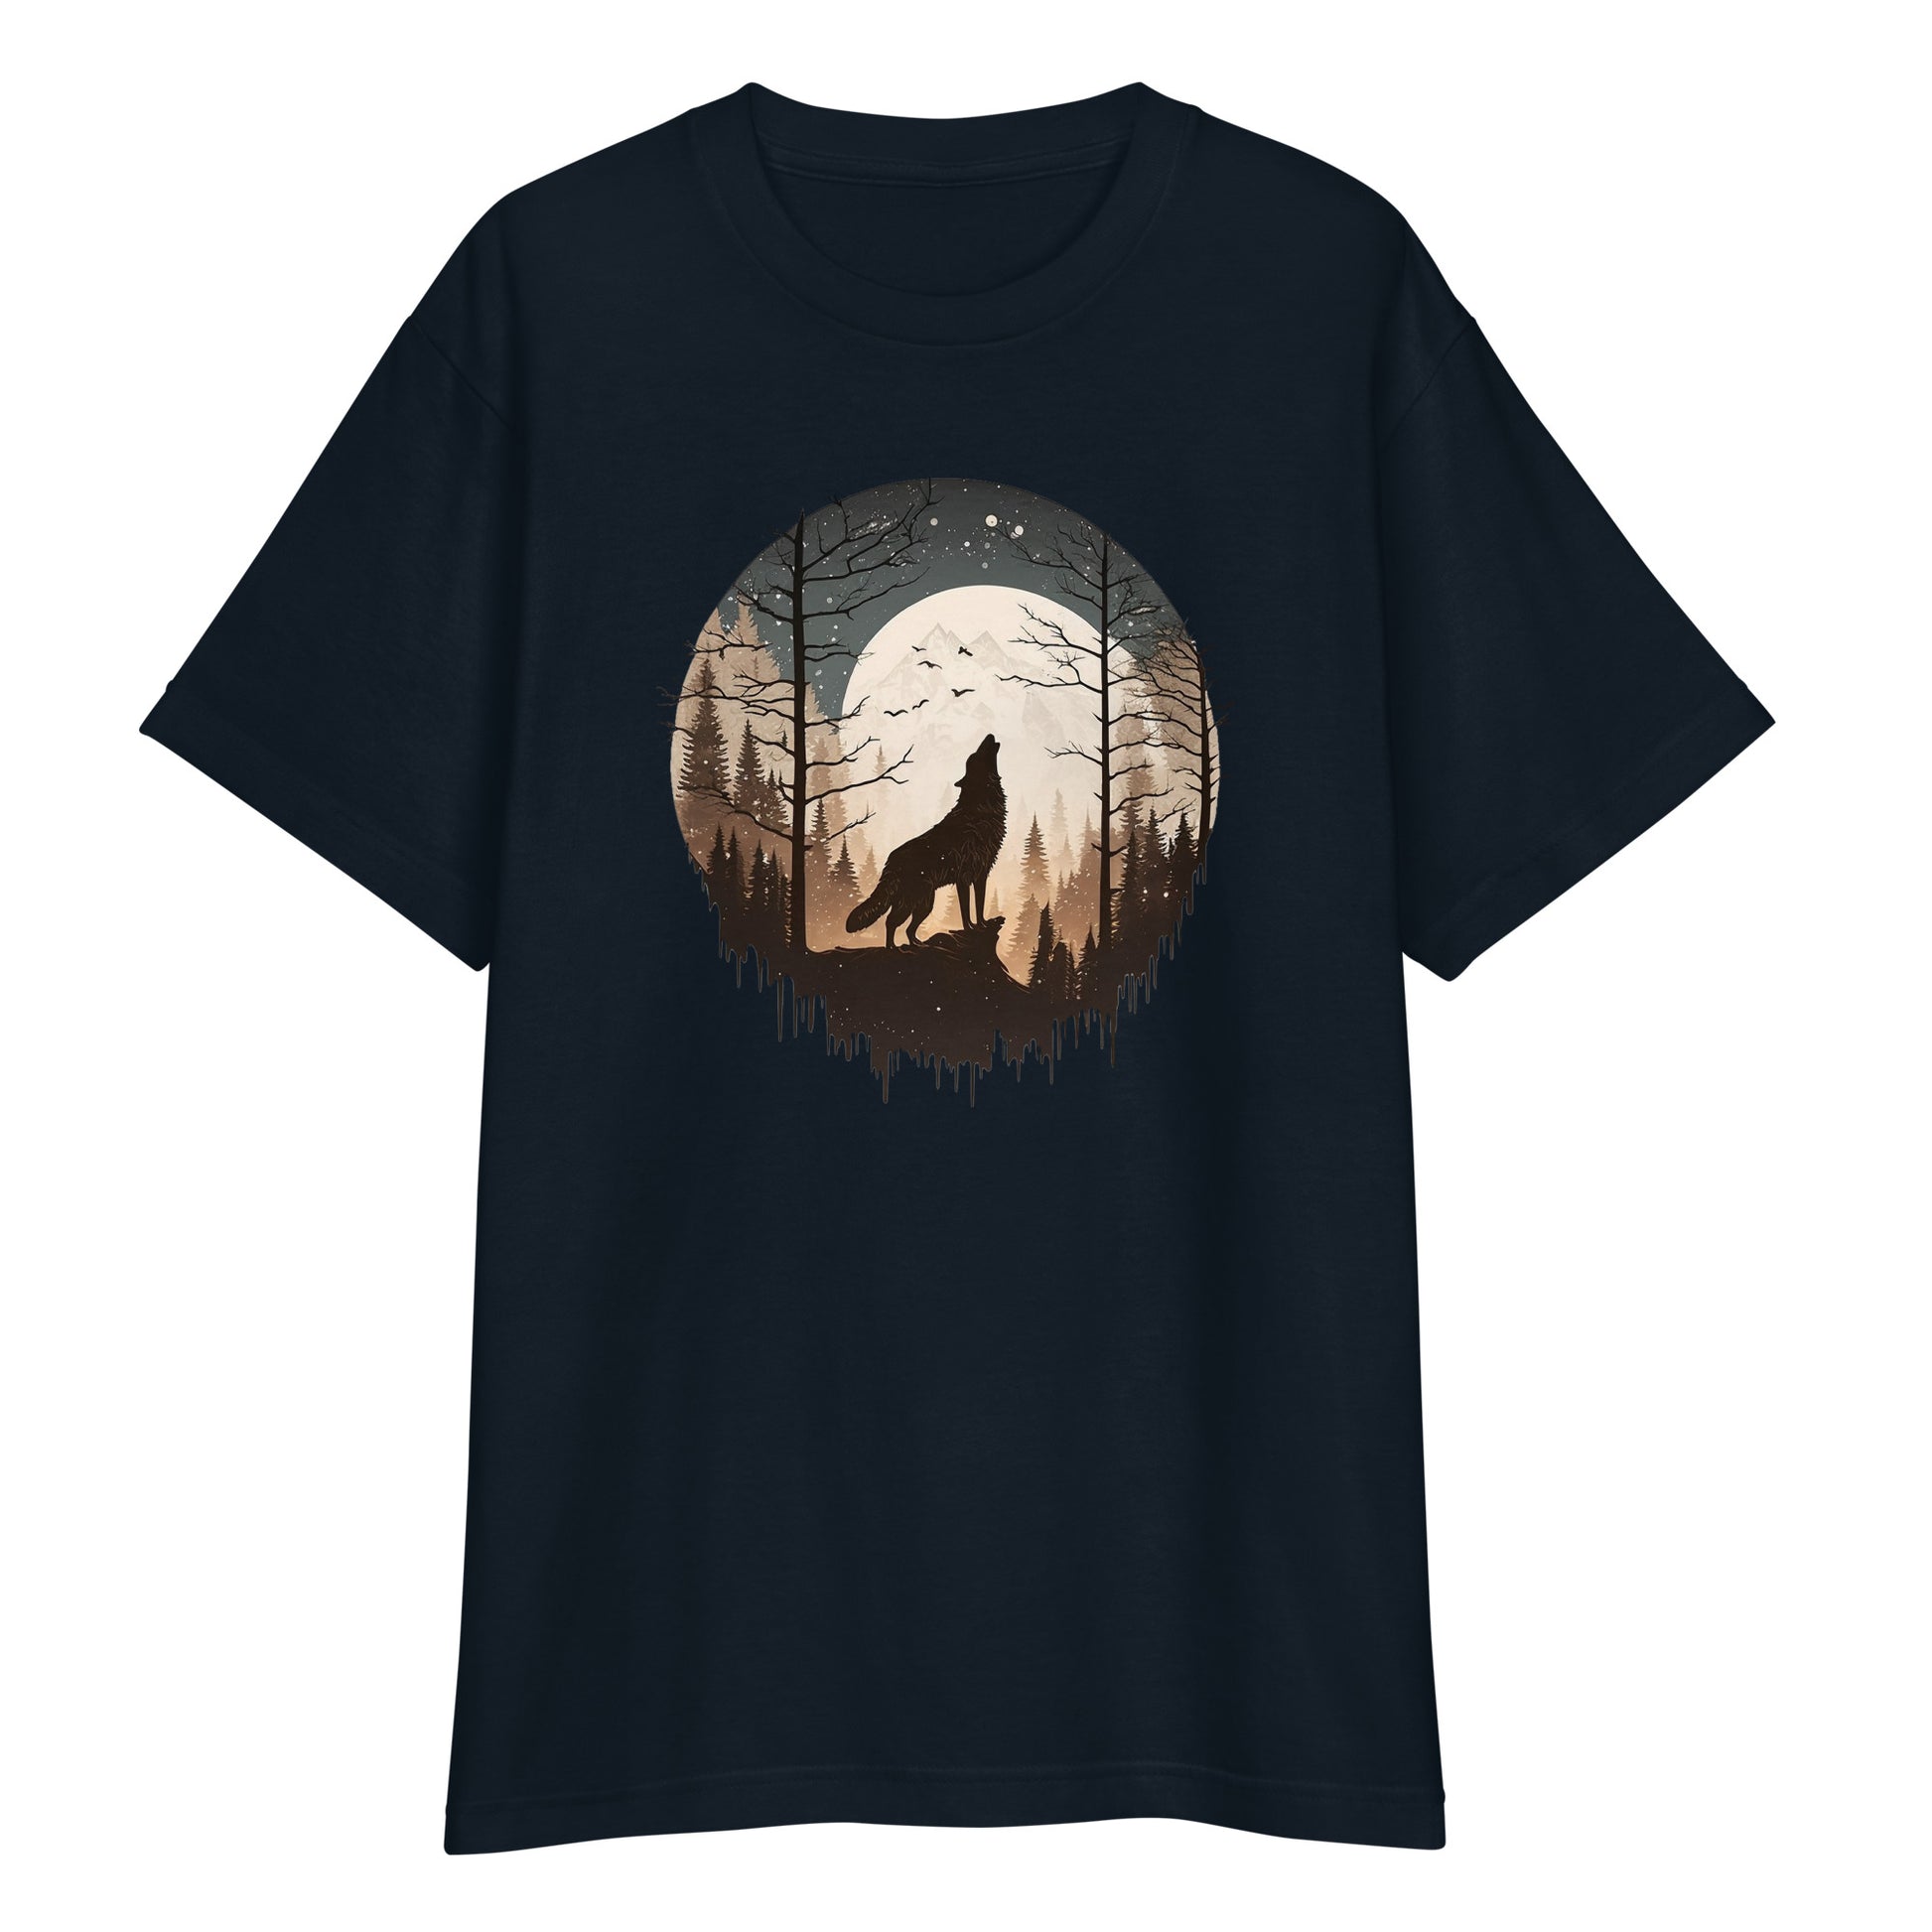 Navy High Quality Tee - Front Design with a Howling Wolf